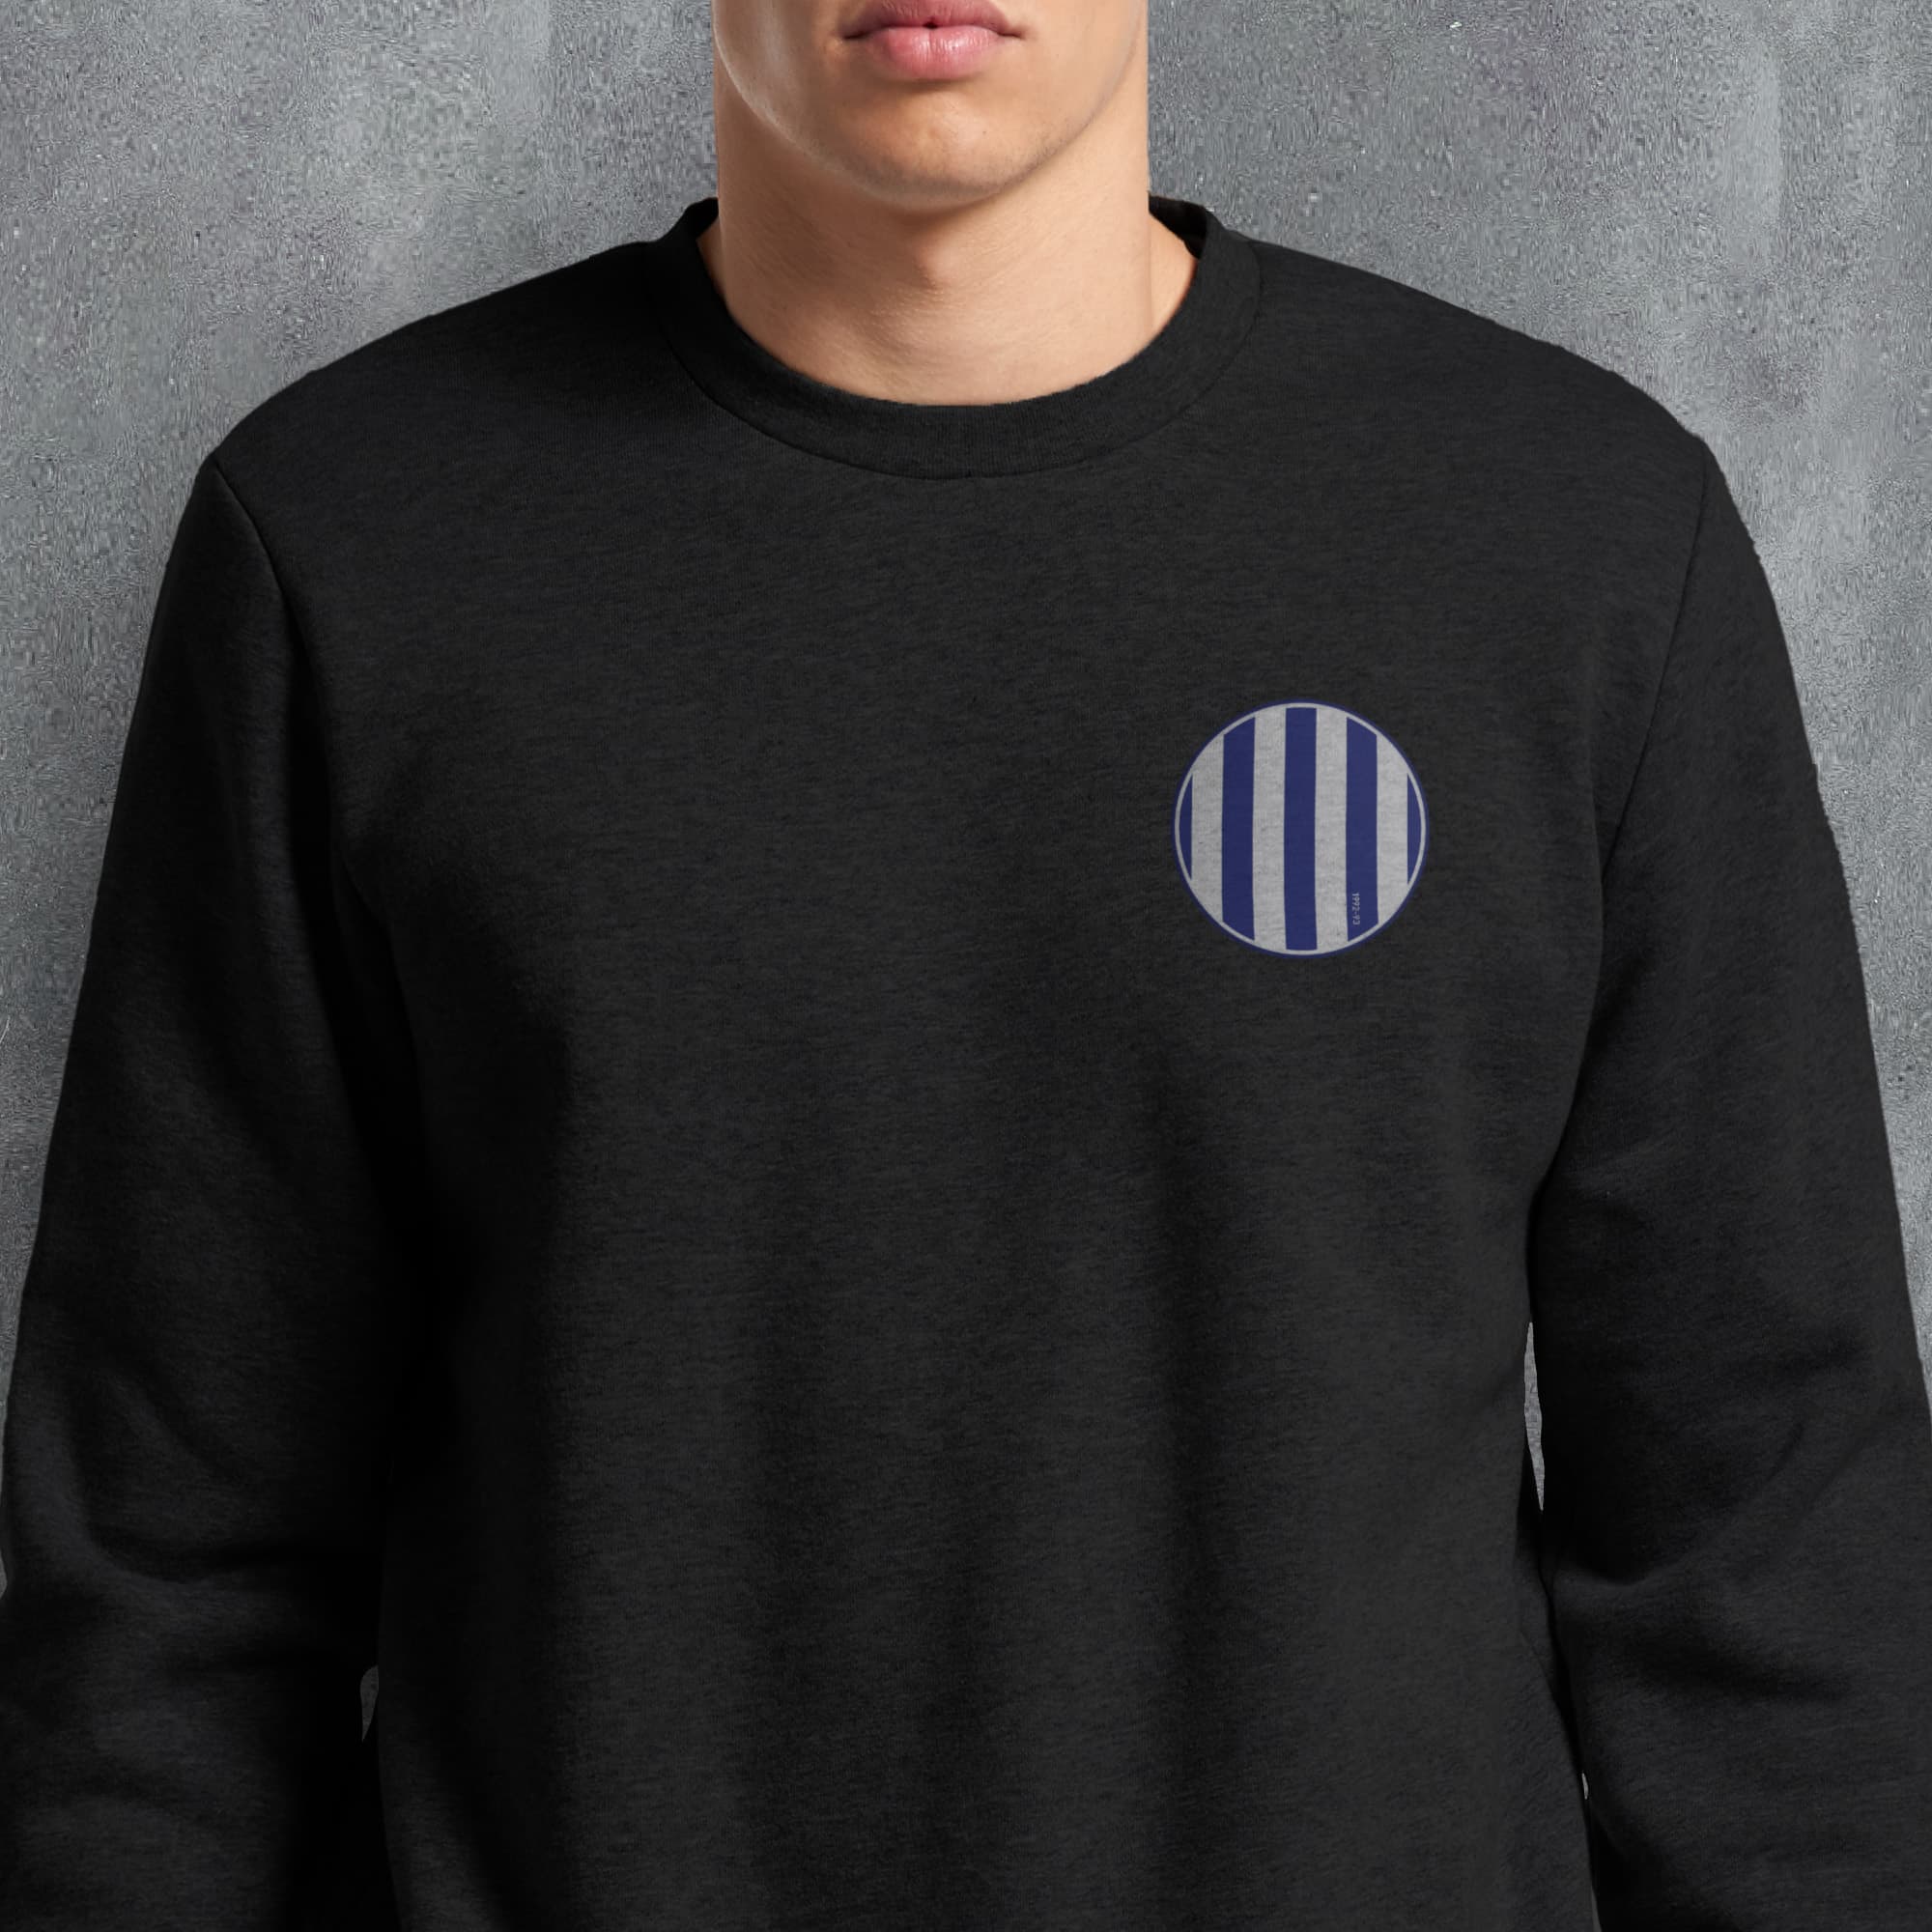 a man wearing a black sweatshirt with a blue and white circle on it